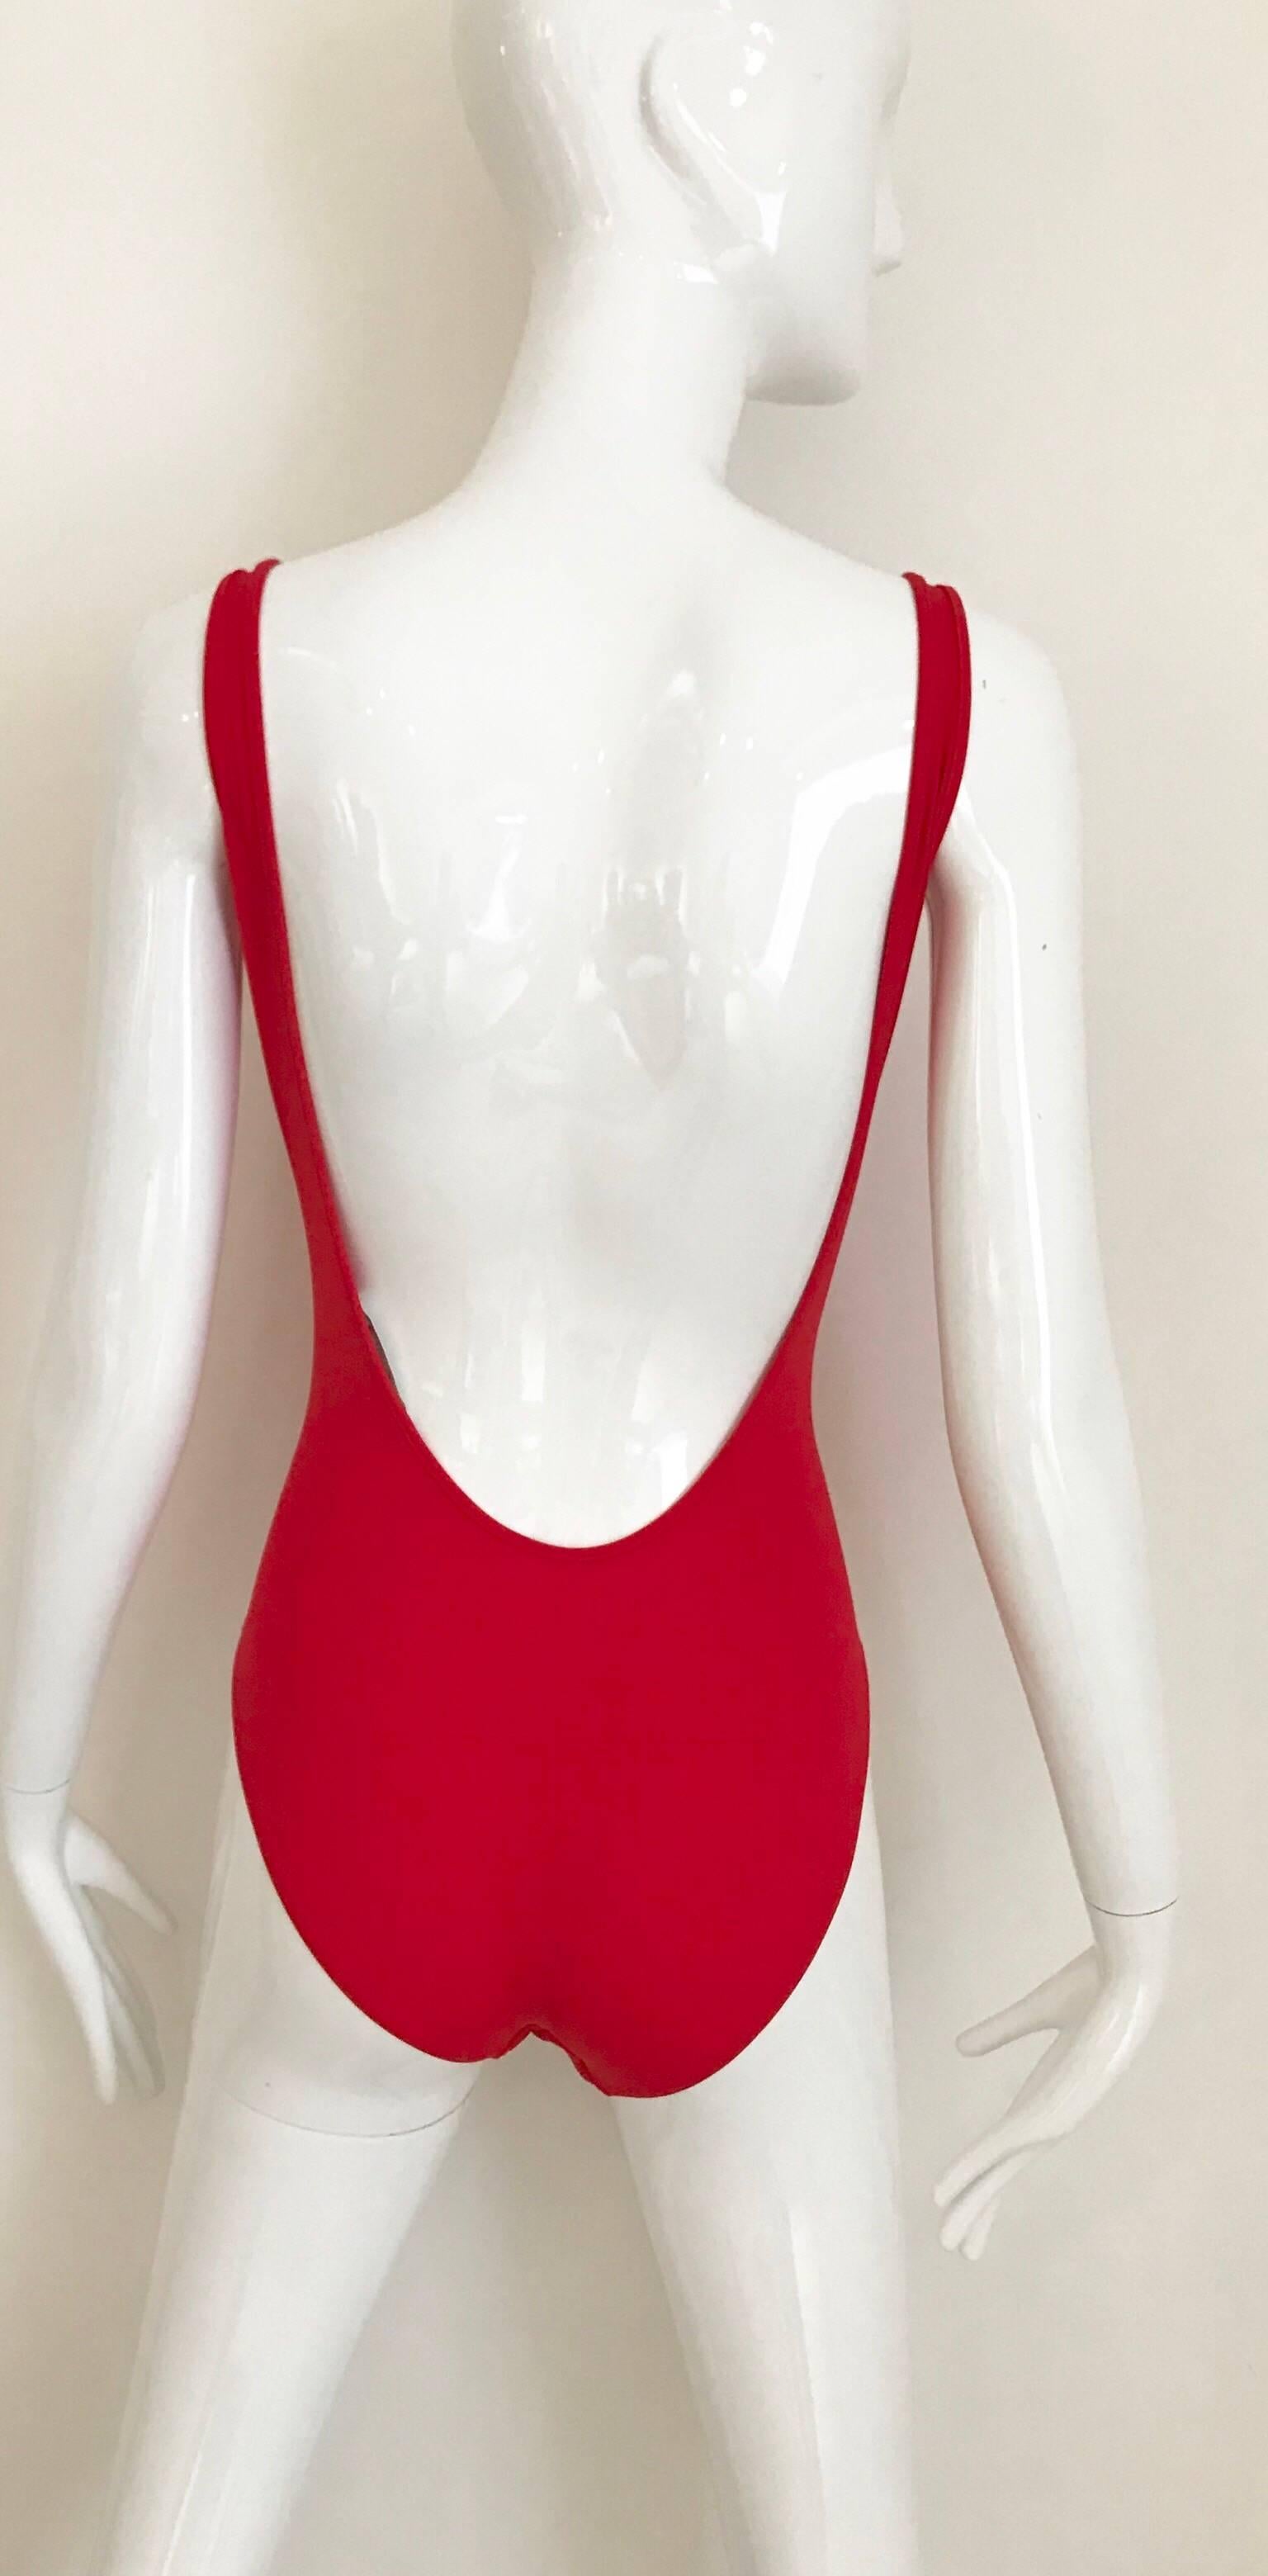 red one piece suit